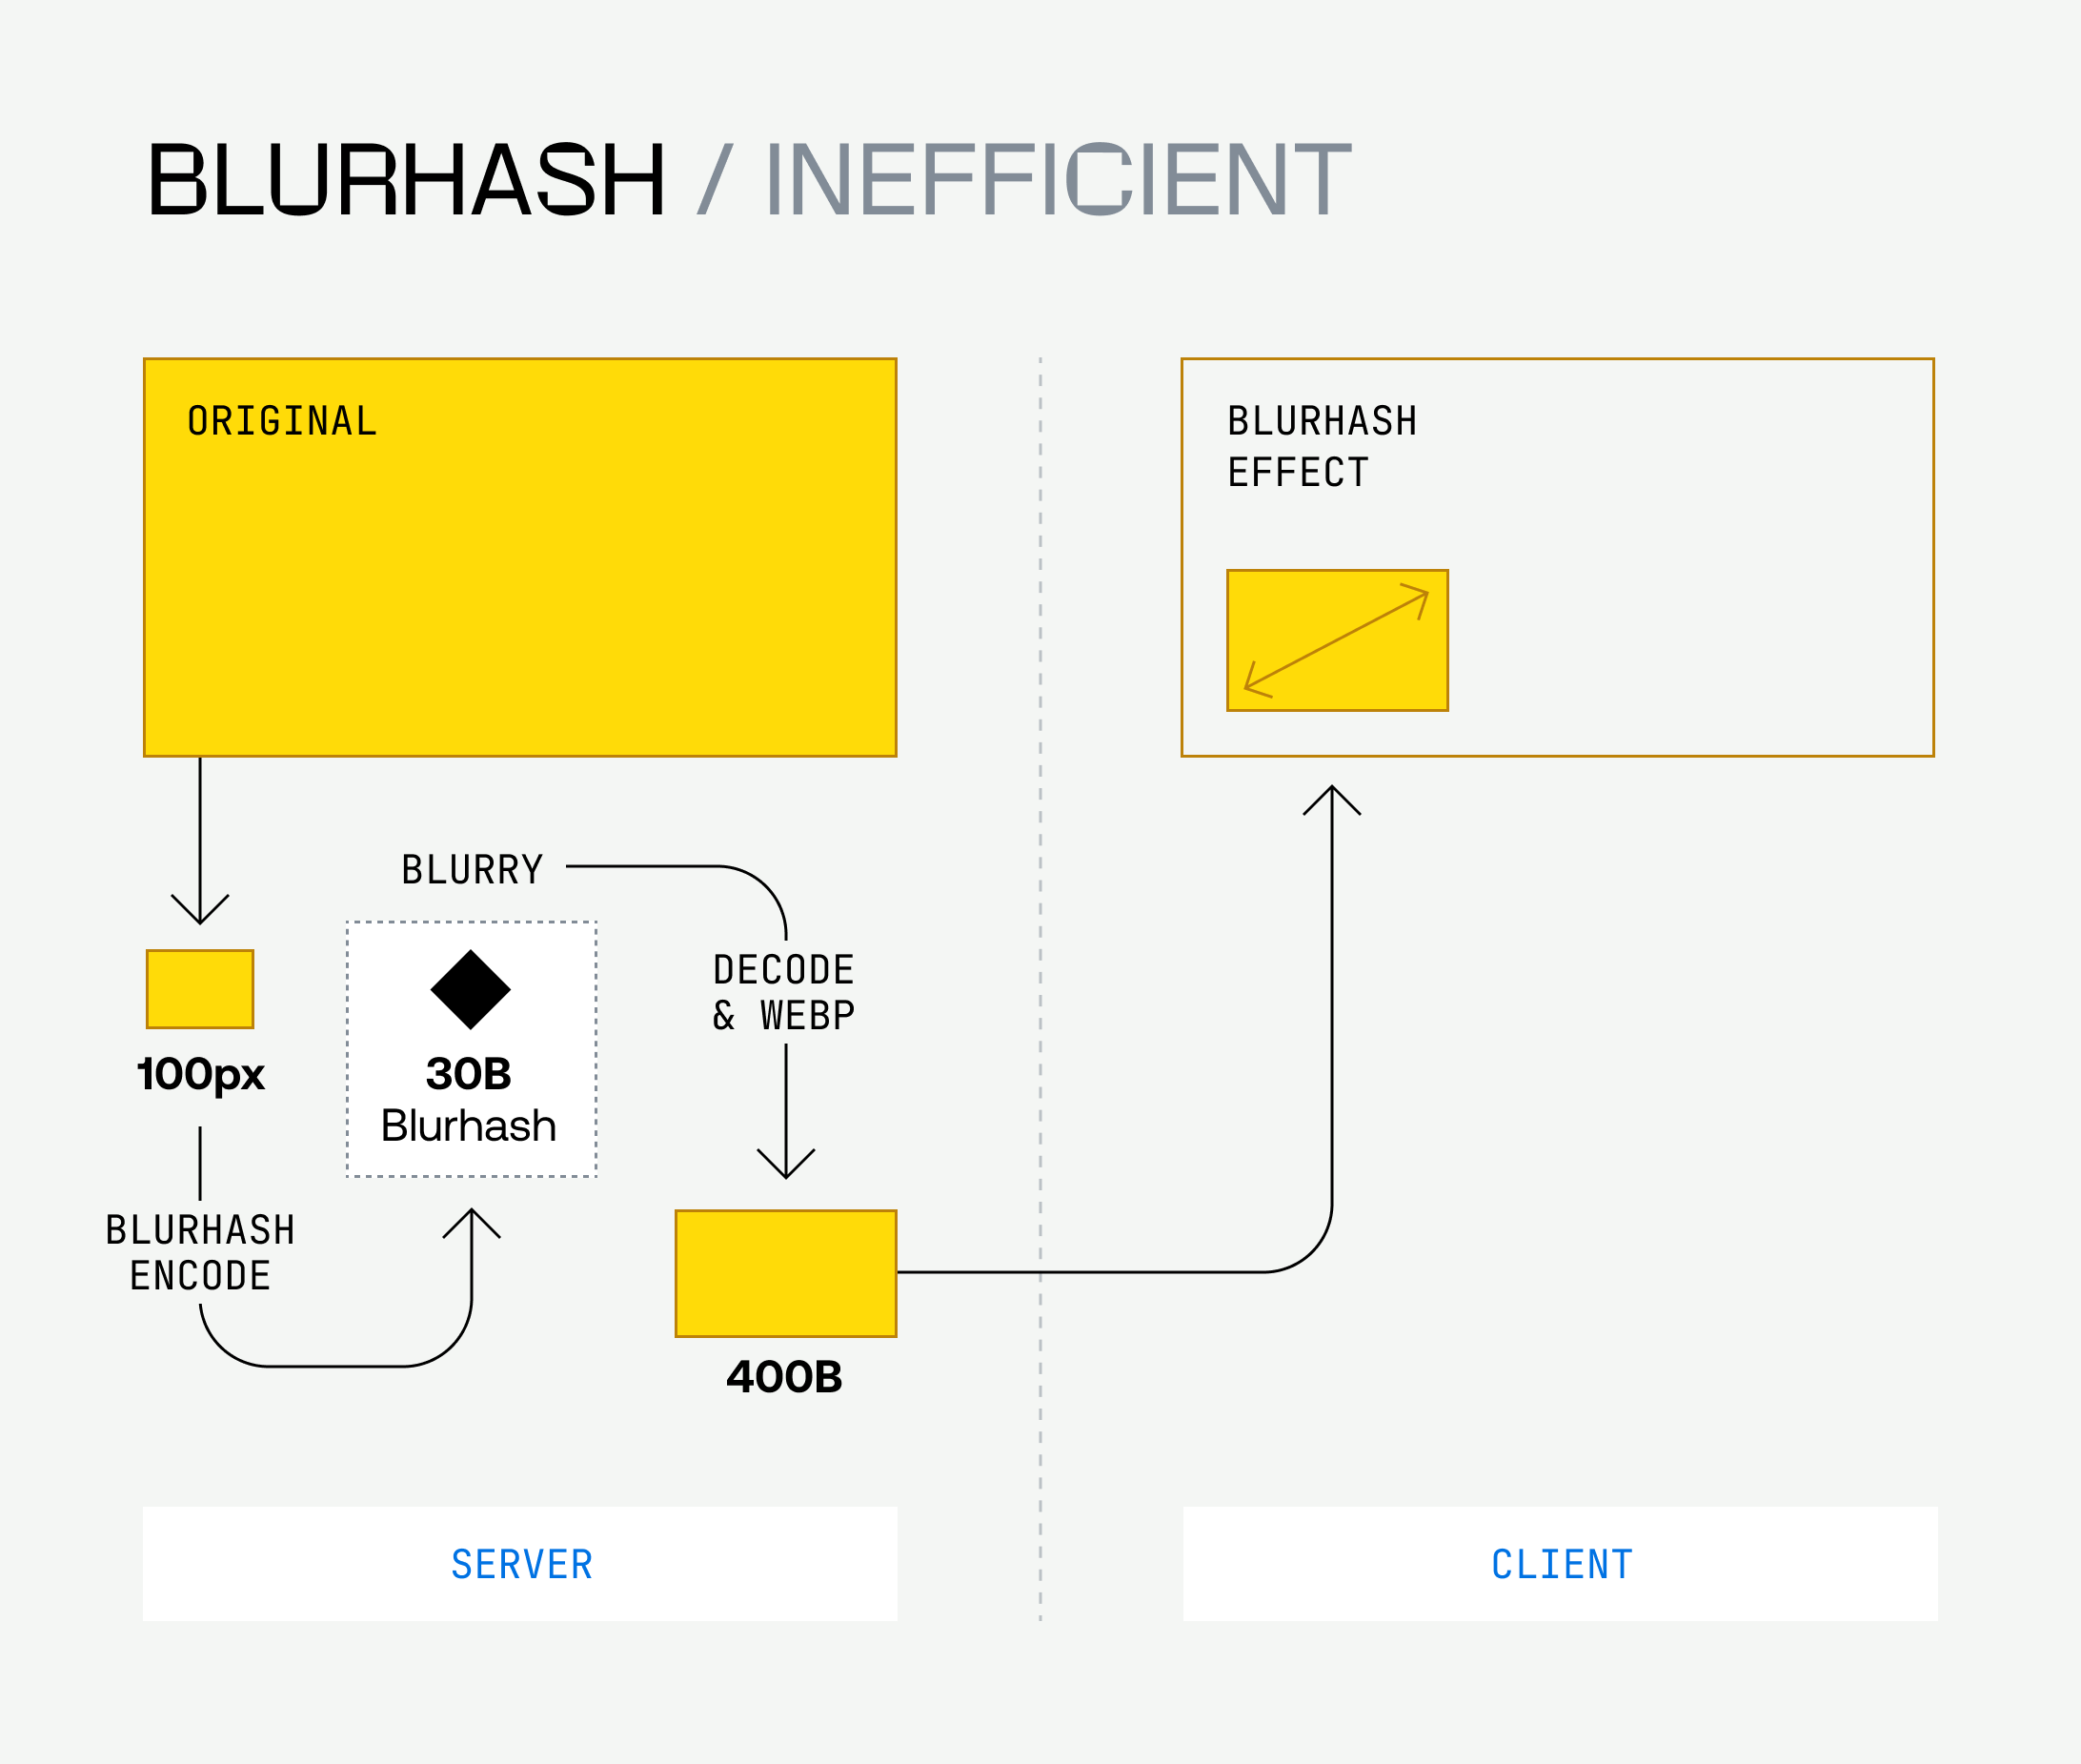 A diagram showing how the blurhash process works